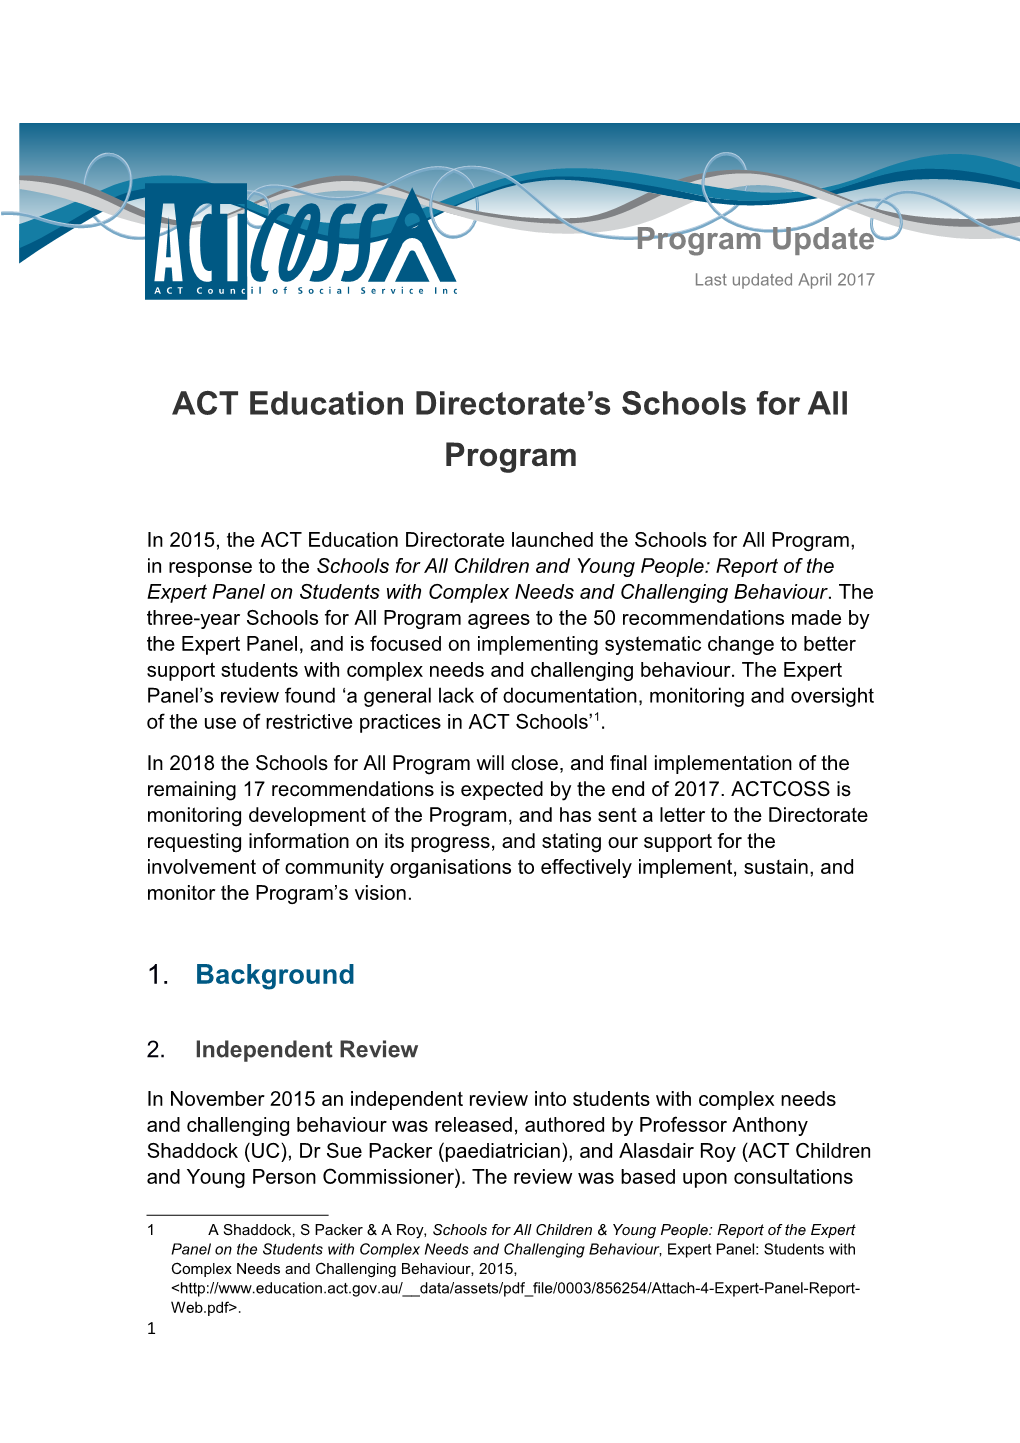 ACT Education Directorate S Schools for All Program